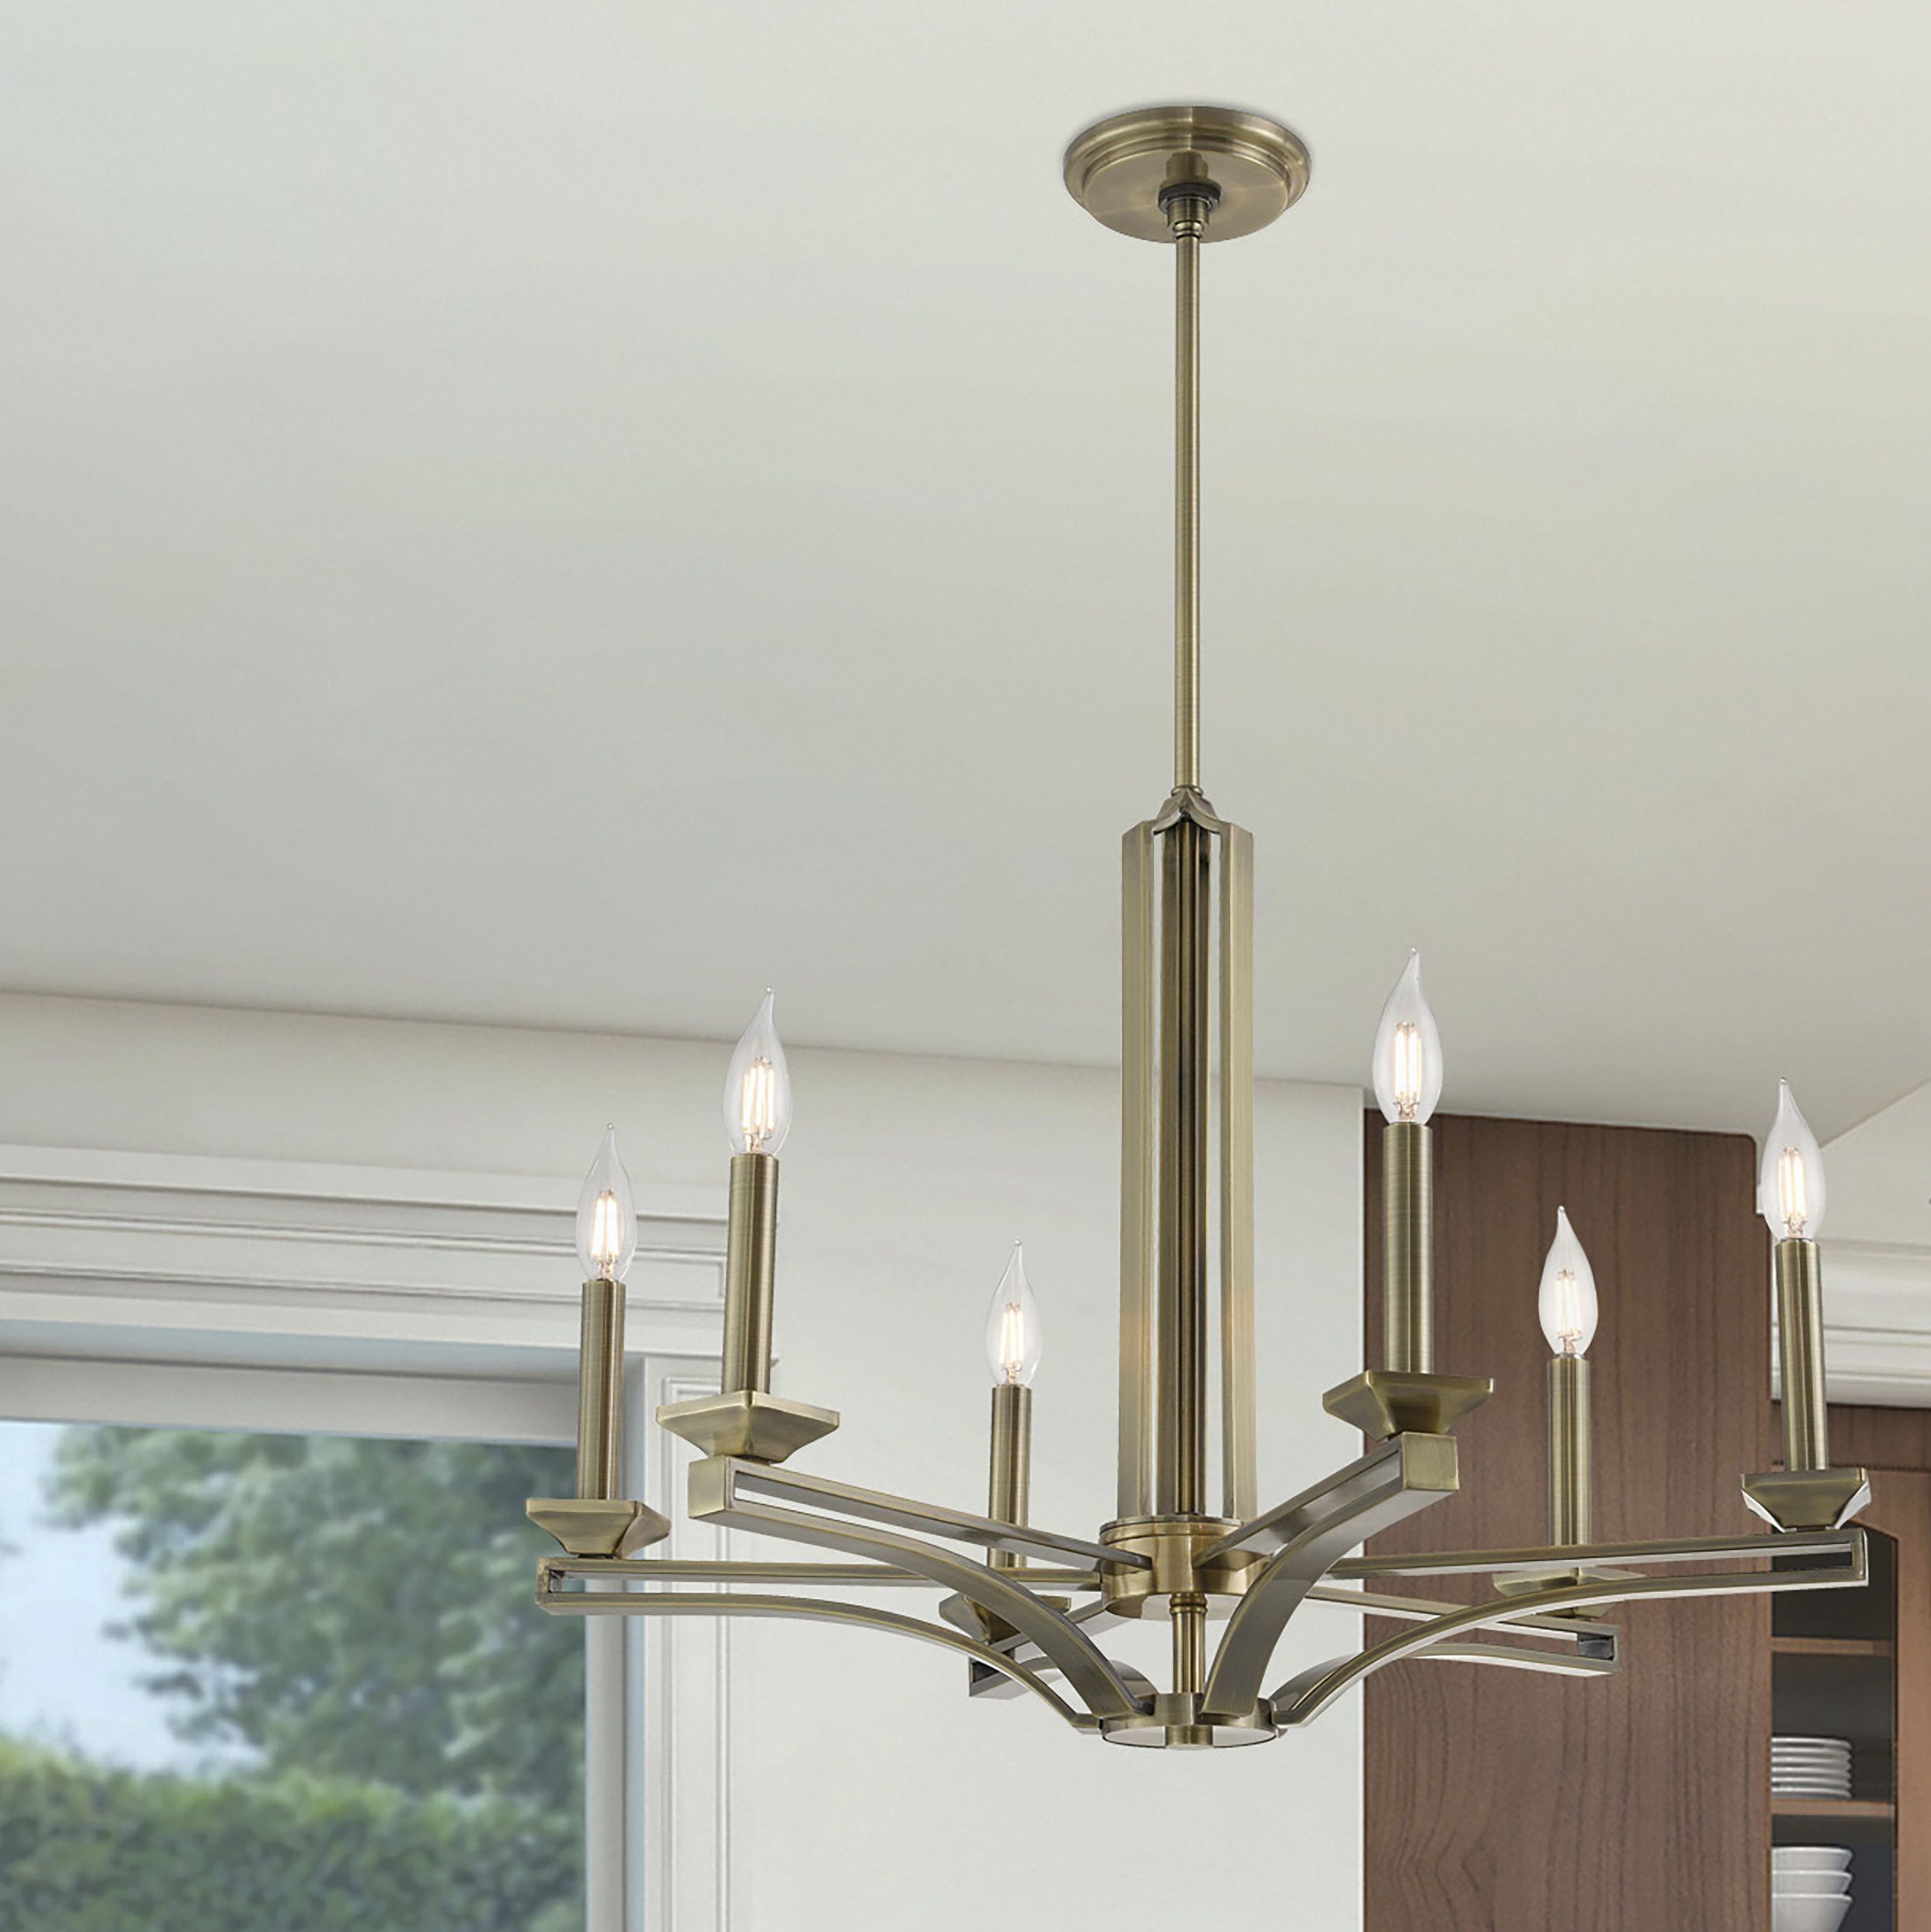 Dedham 6 Light Candle Style Chandelier Pertaining To Hesse 5 Light Candle Style Chandeliers (View 17 of 30)